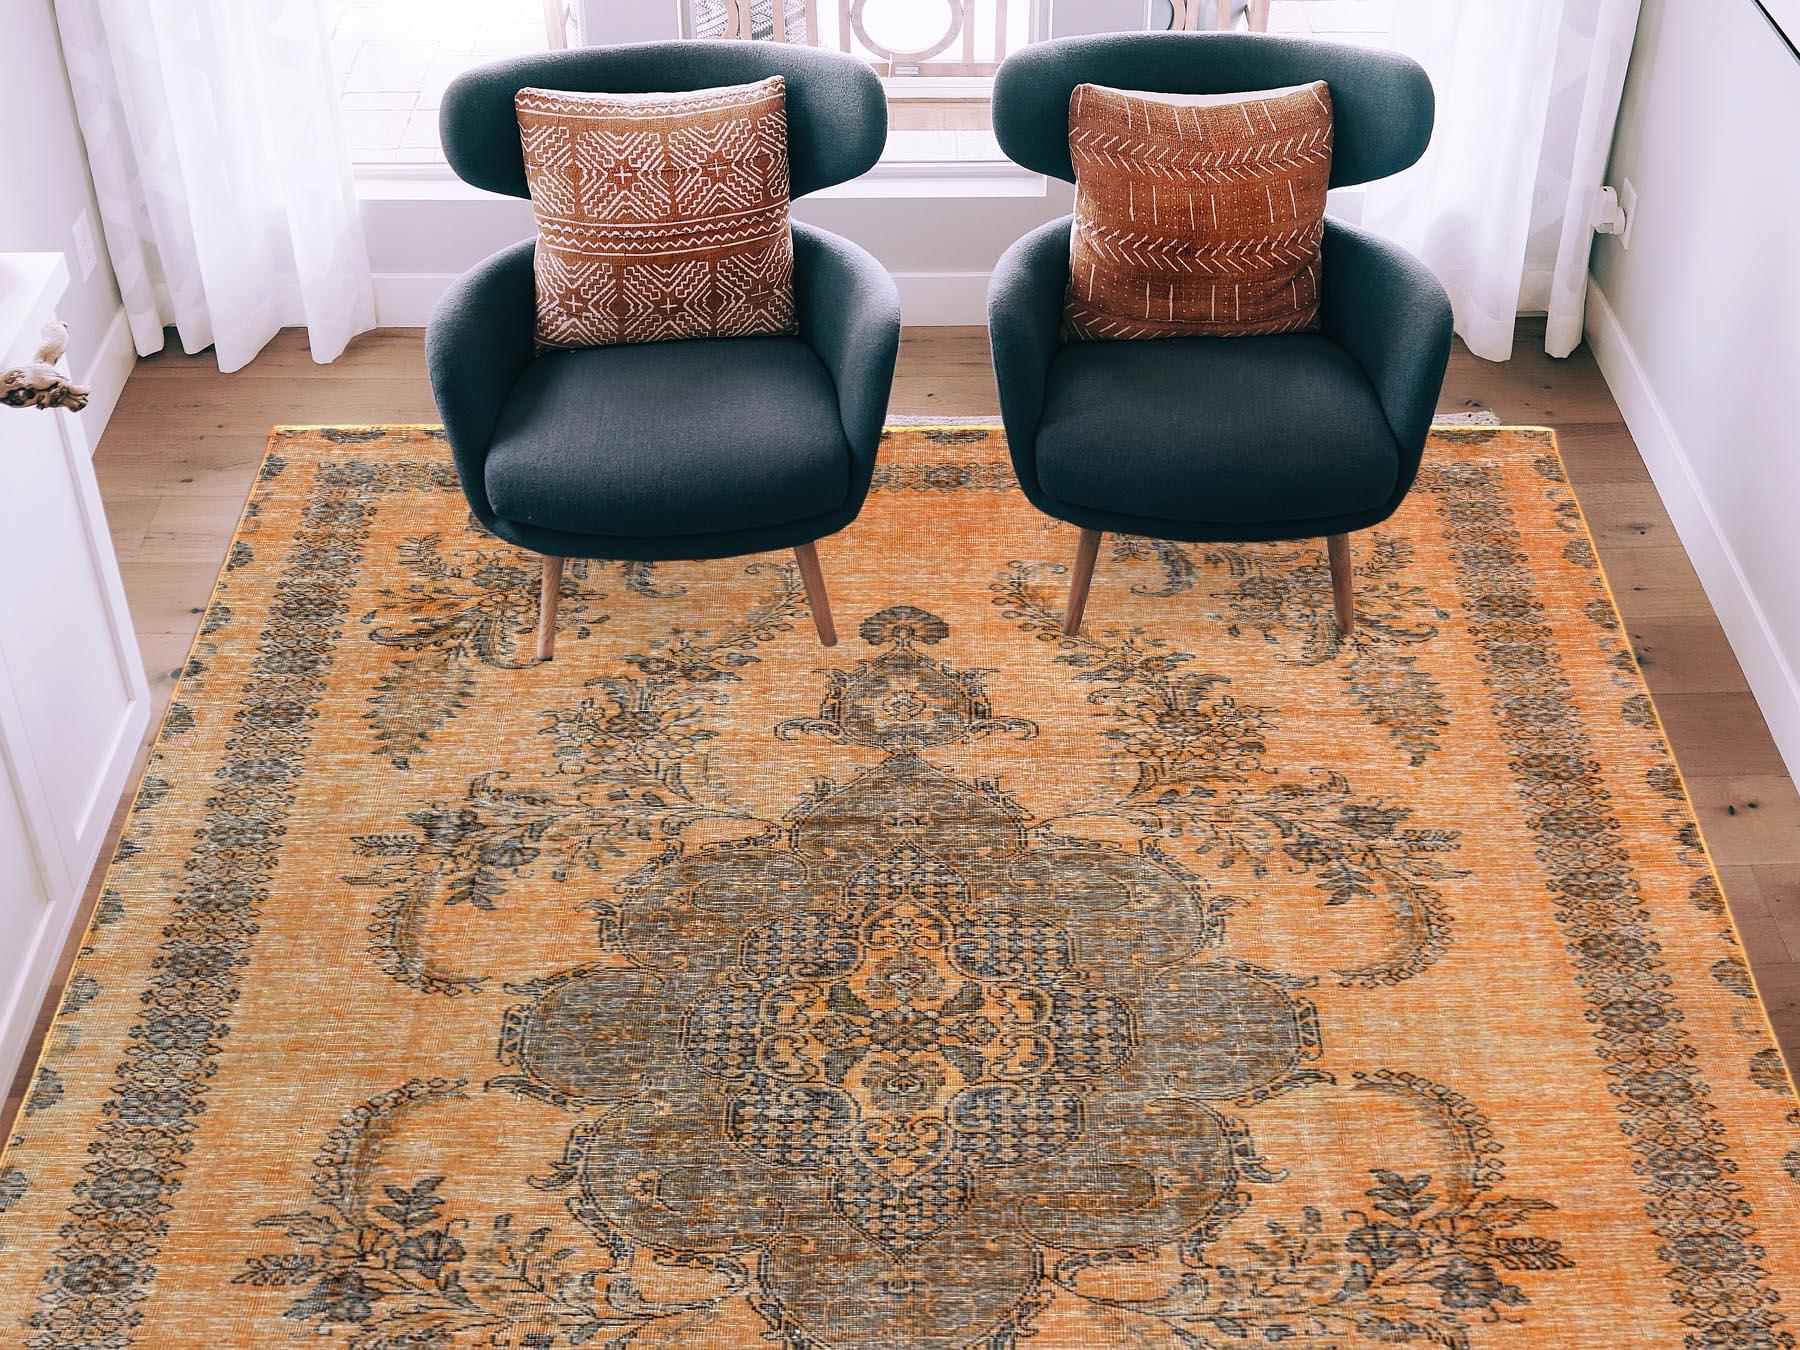 This fabulous hand-knotted carpet has been created and designed for extra strength and durability. This rug has been handcrafted for weeks in the traditional method that is used to make
Exact rug size in feet and inches : 6'1